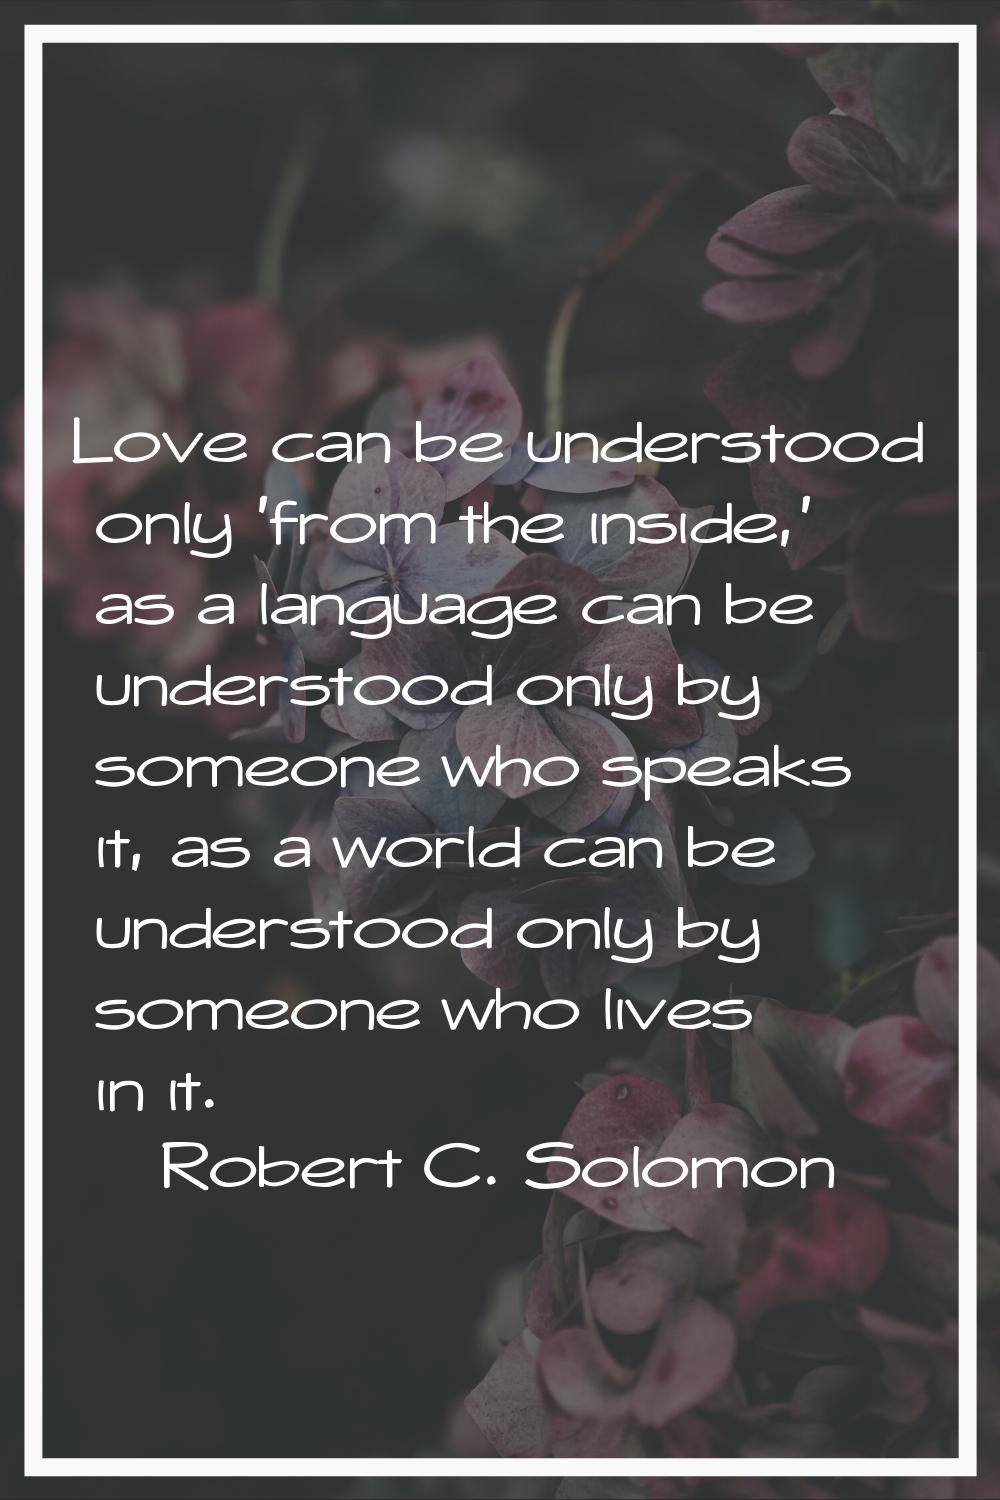 Love can be understood only 'from the inside,' as a language can be understood only by someone who 